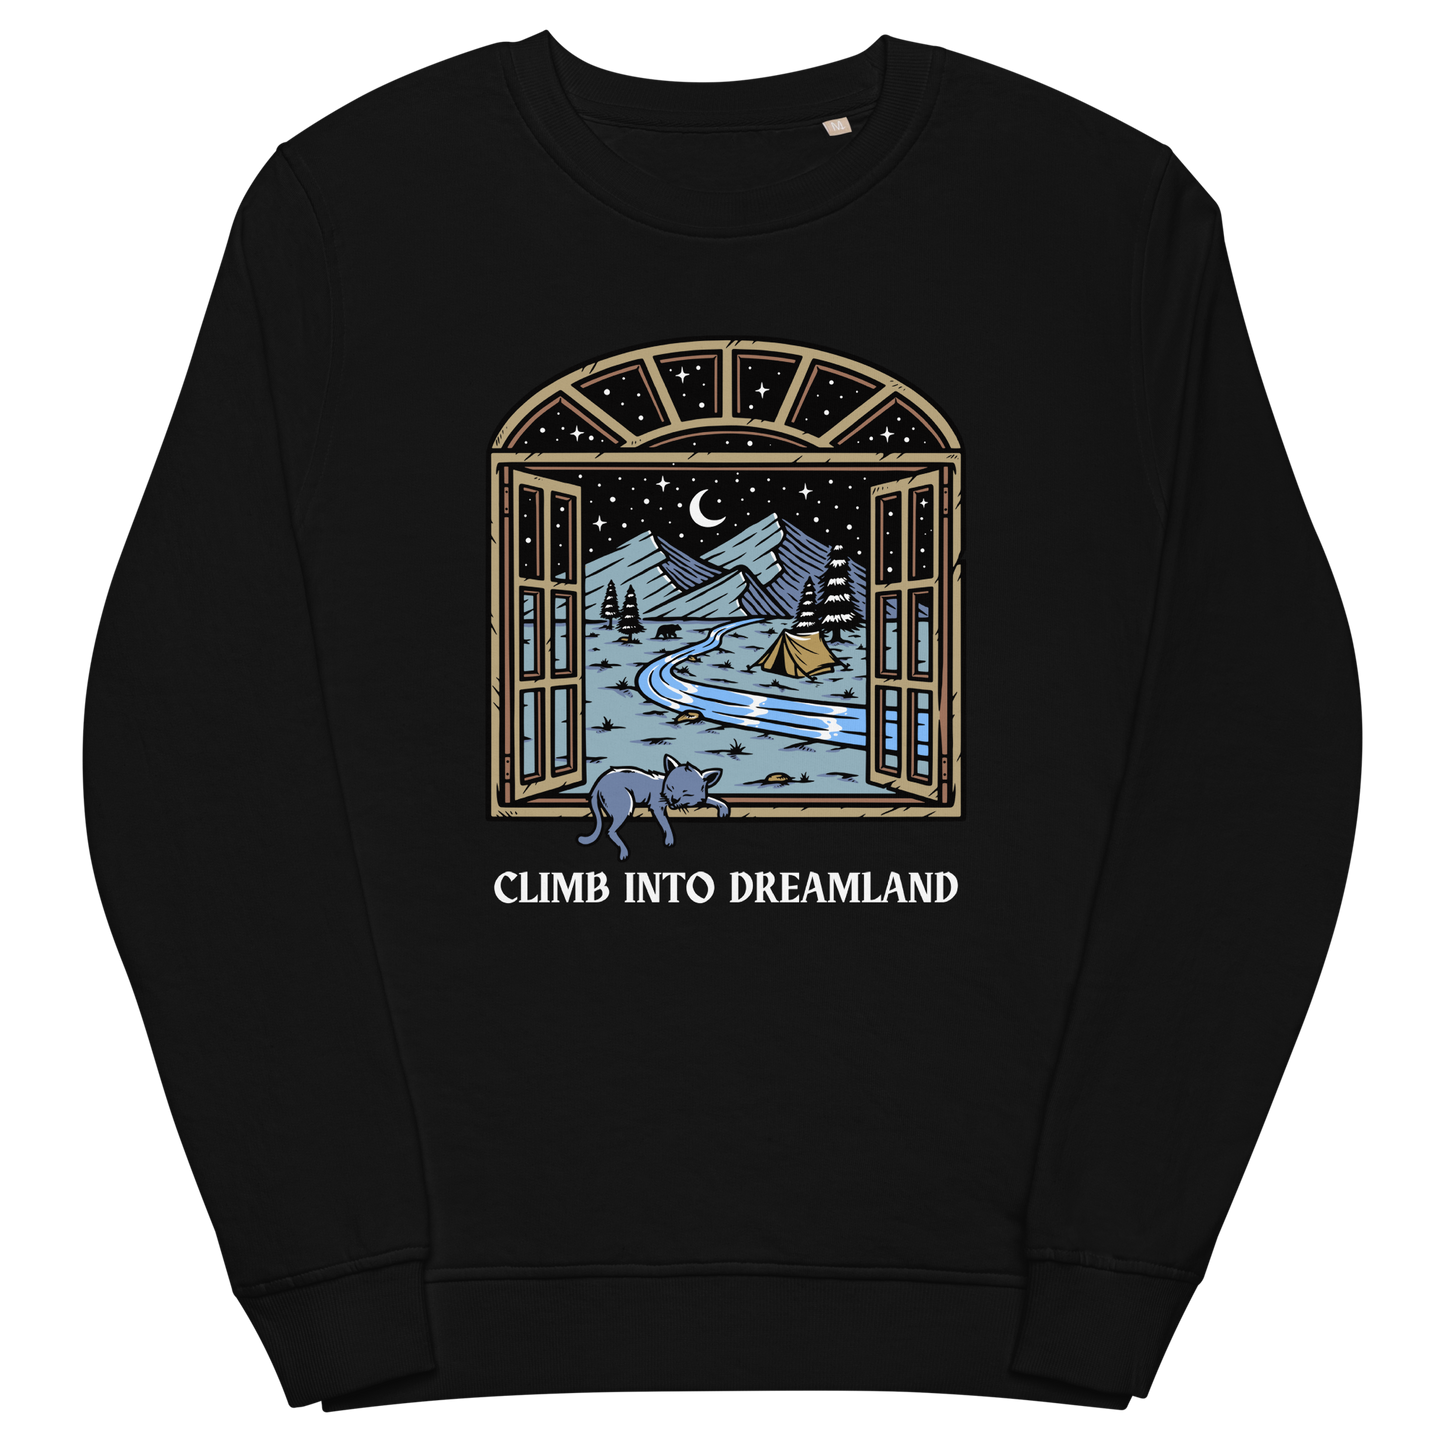 Black Organic Cotton Climb Into Dreamland Sweatshirt featuring a mesmerizing mountain view graphic on the chest - Cool Graphic Nature Sweatshirts - Boozy Fox